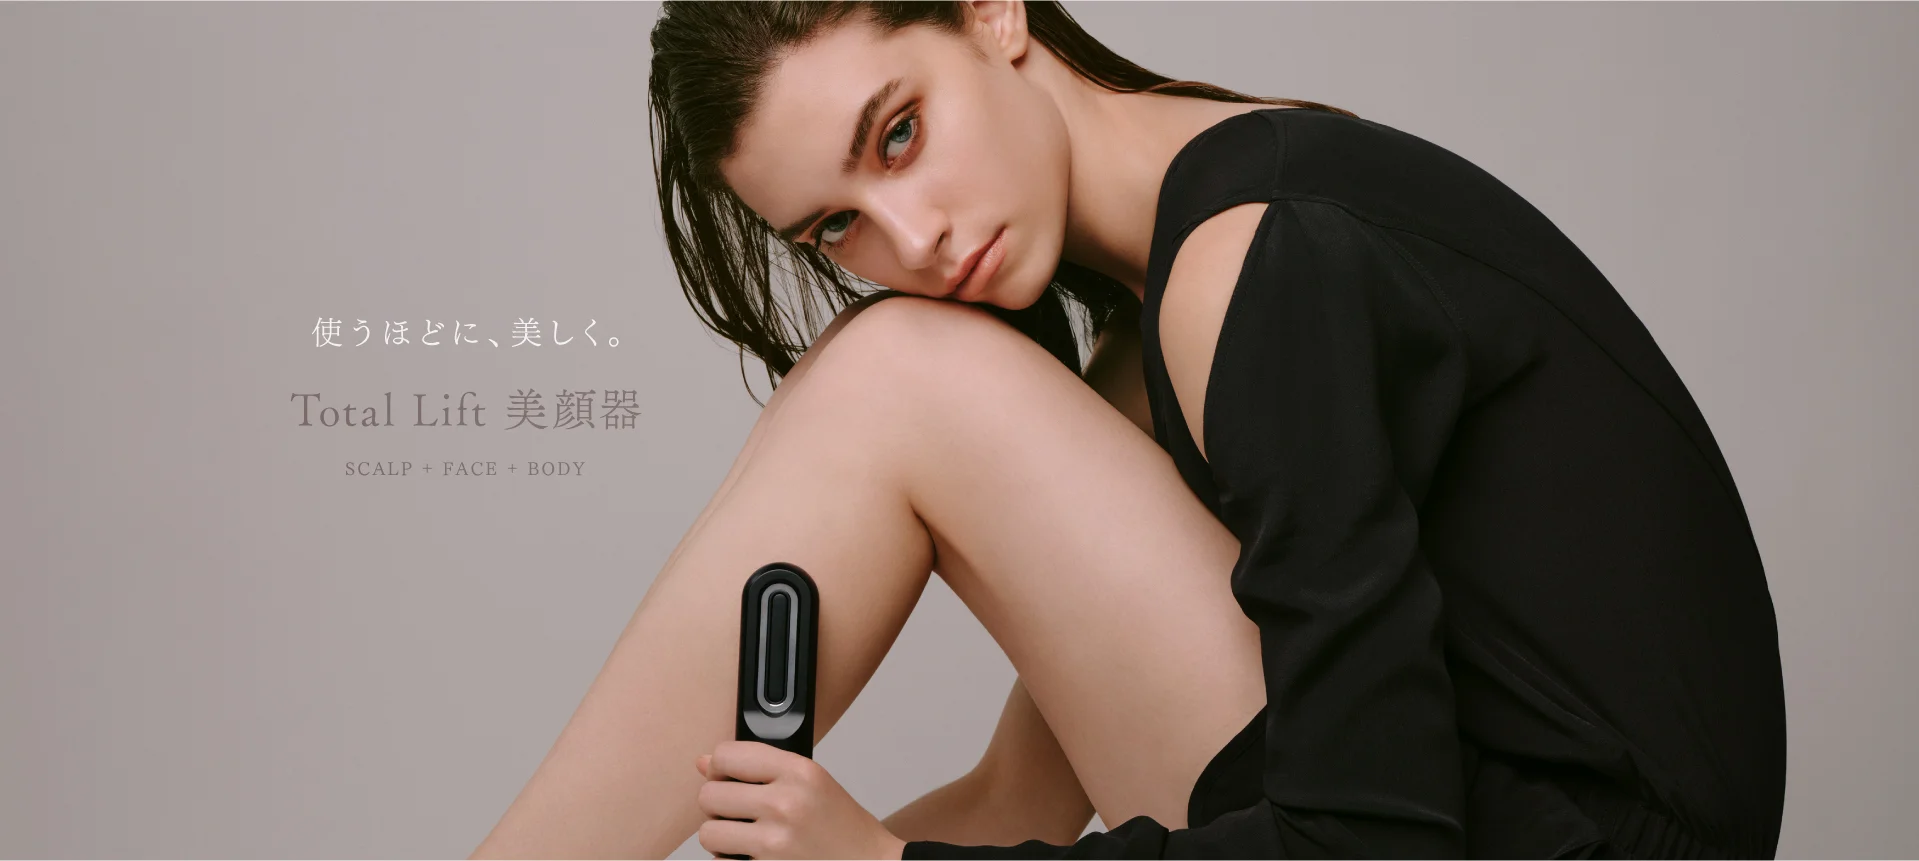 MYTREX® Official Online Store | Beauty & Wellness Brand From Japan